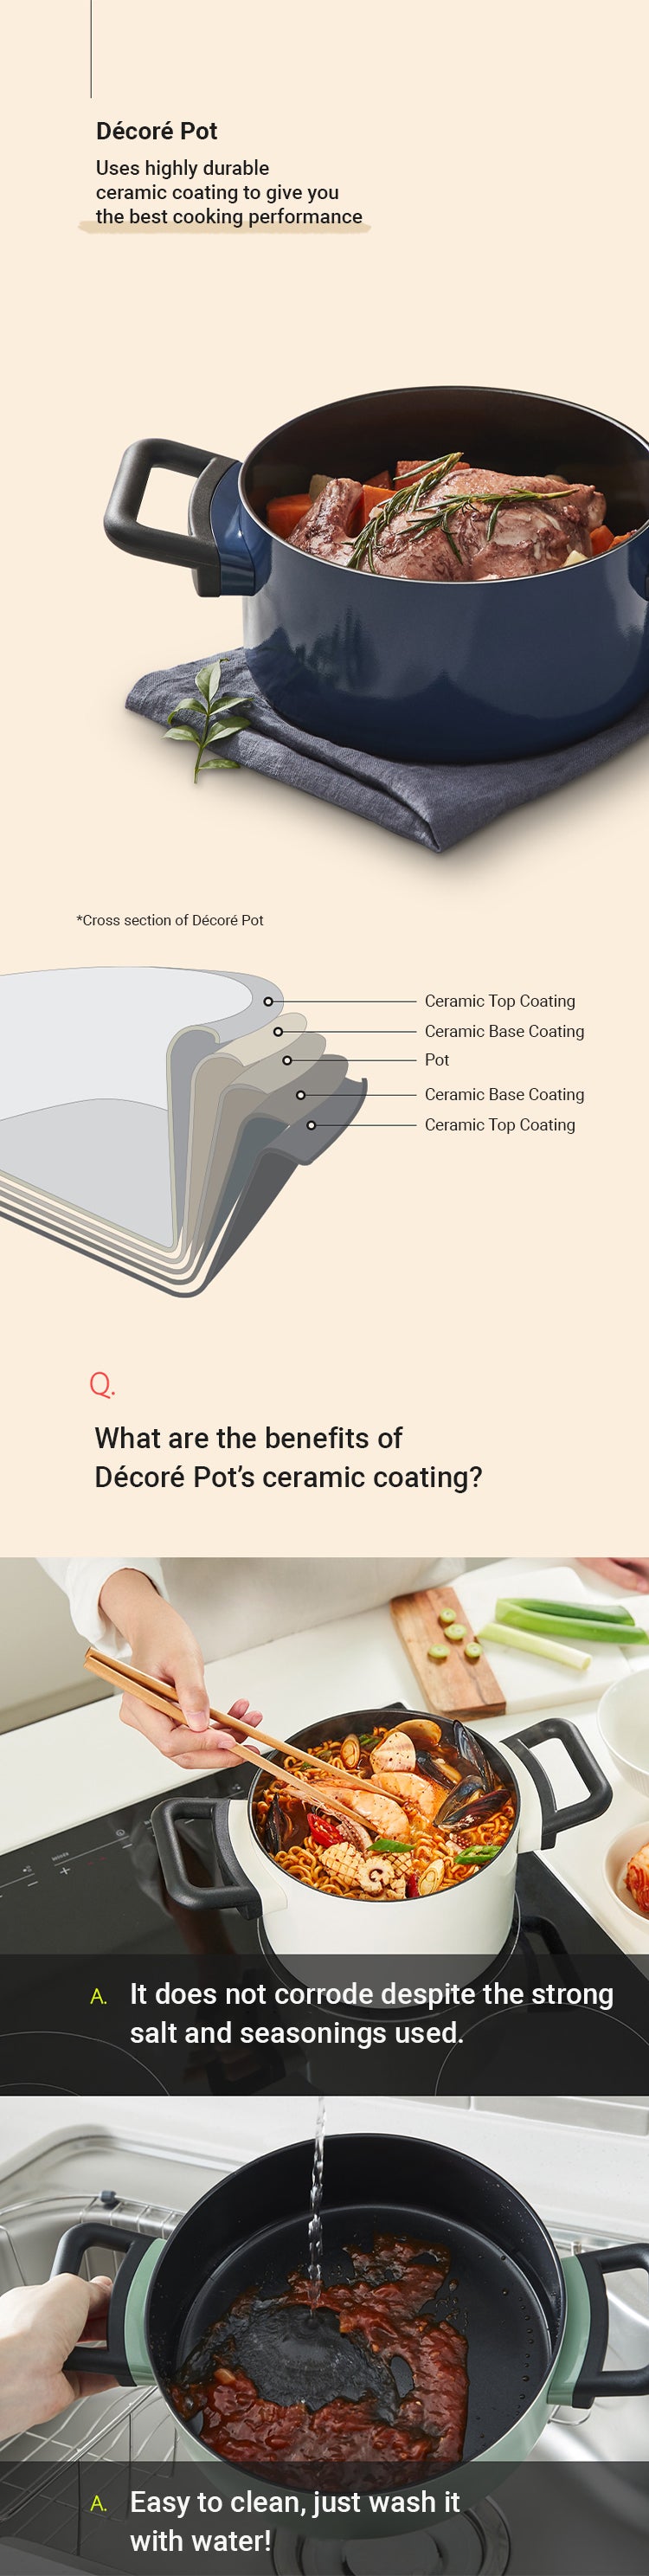 Decore pots have inner ceramic coatings that are resistant to stains.